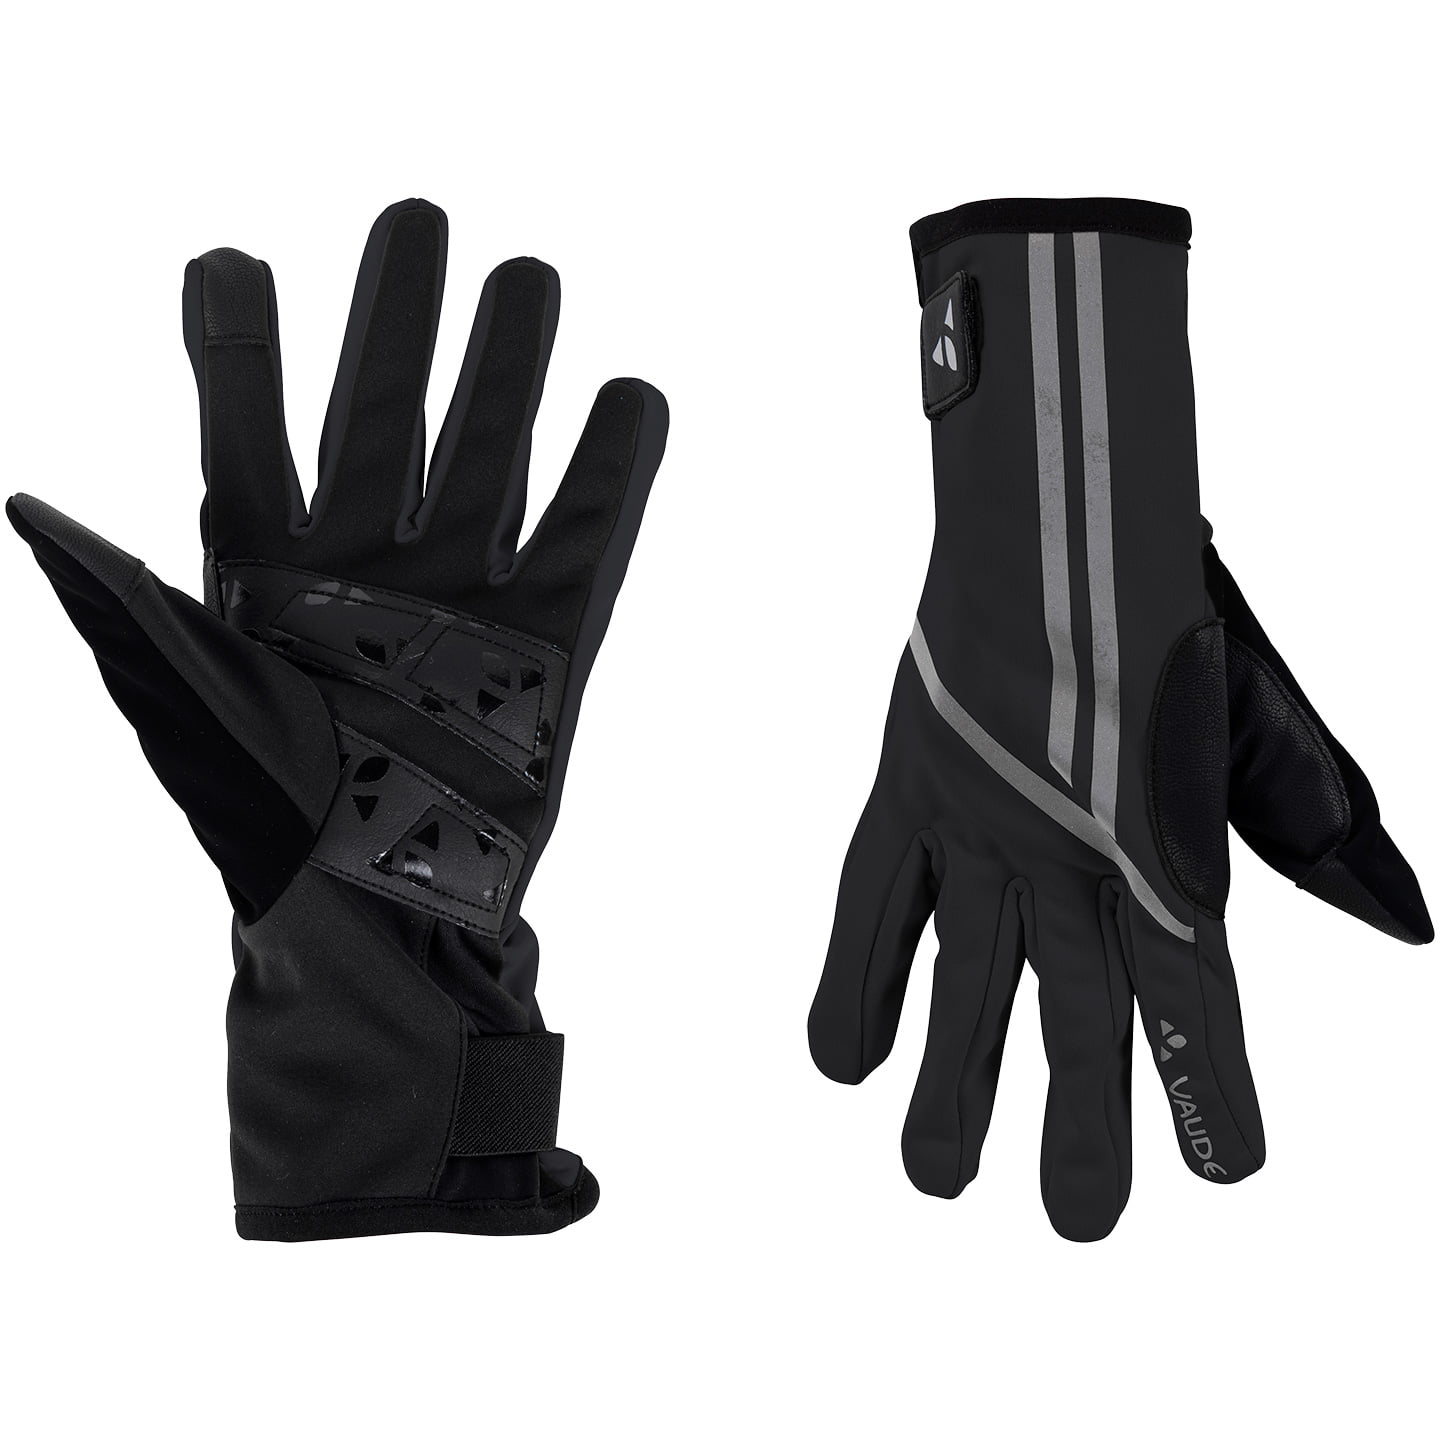 VAUDE Posta Warm Winter Gloves Winter Cycling Gloves, for men, size 8, Cycle gloves, Cycle clothes